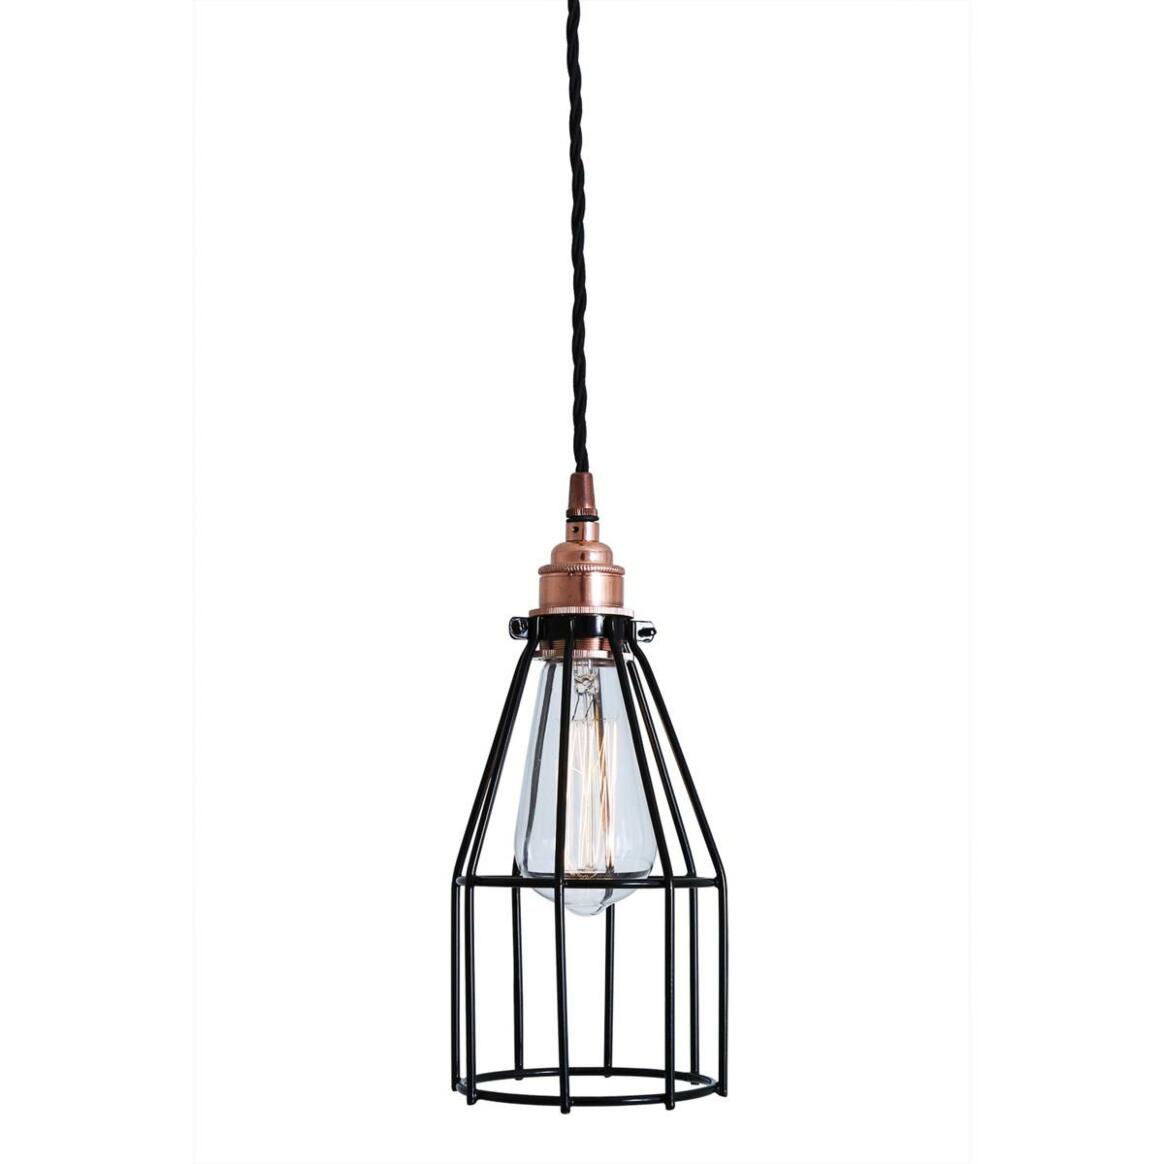 Lima Industrial Cage Copper Pendant Light main product image